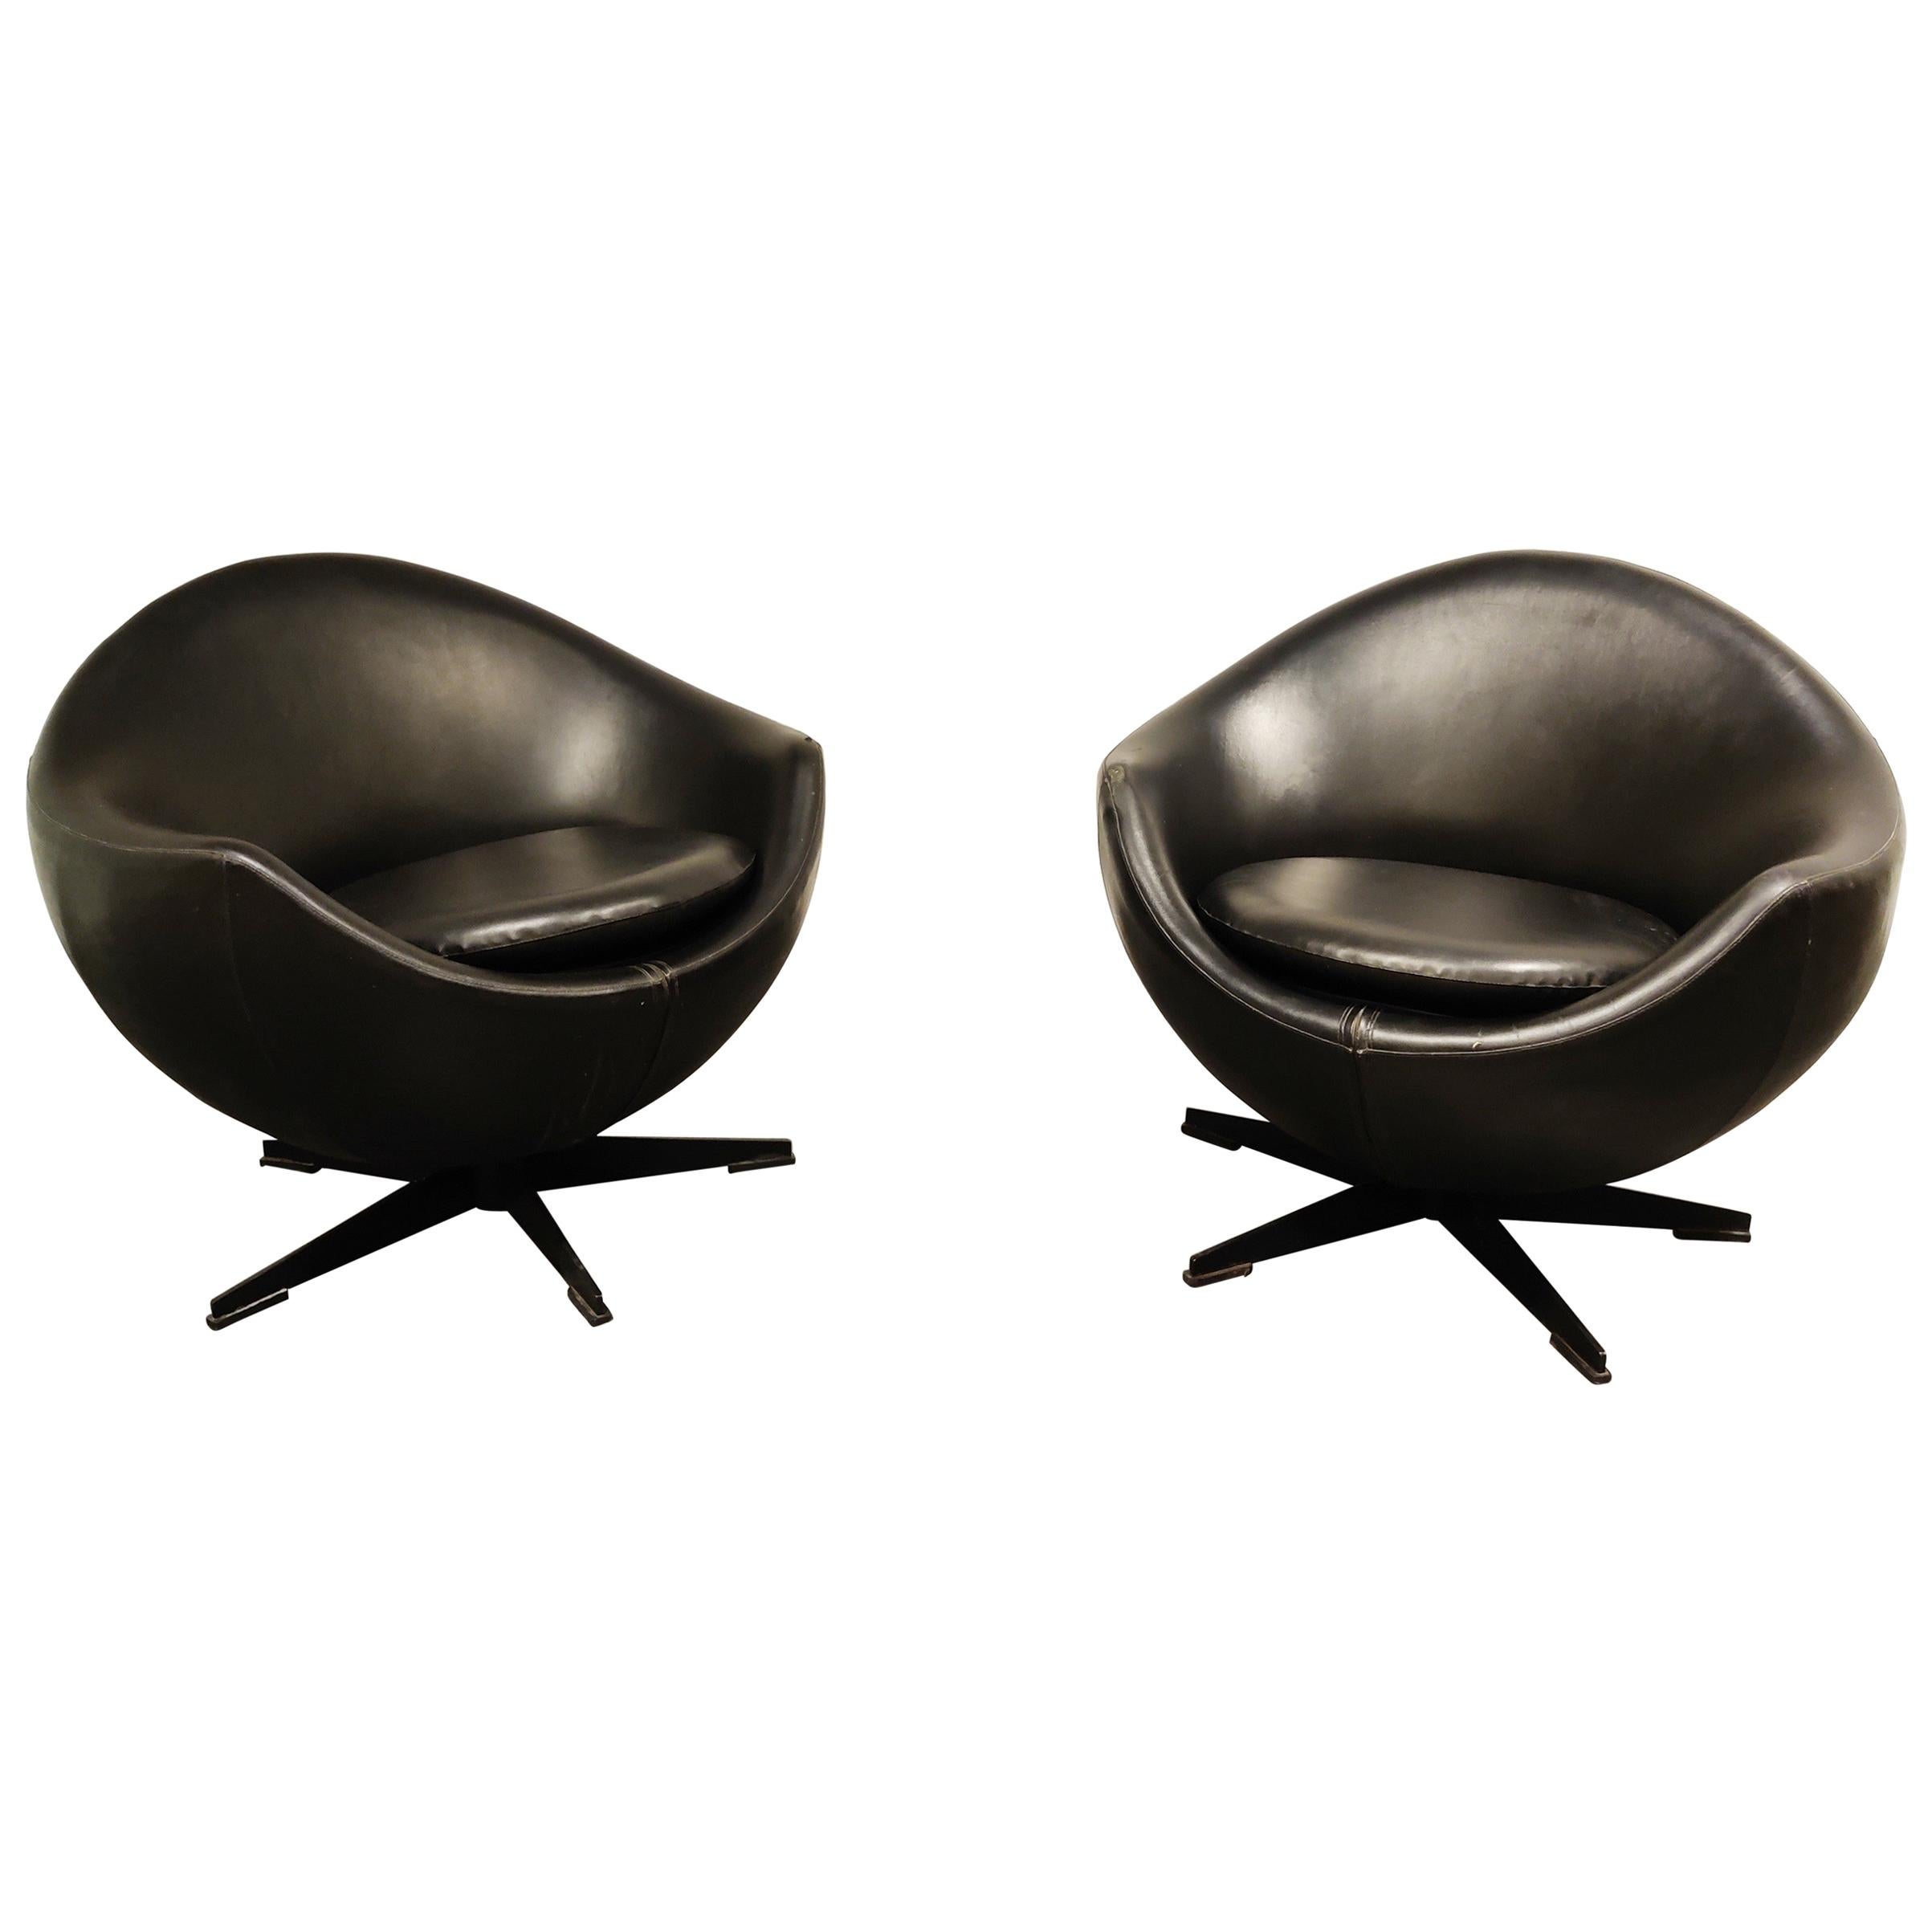 Pair of Mars Lounge Chairs by Pierre Guariche for Meurop, 1965